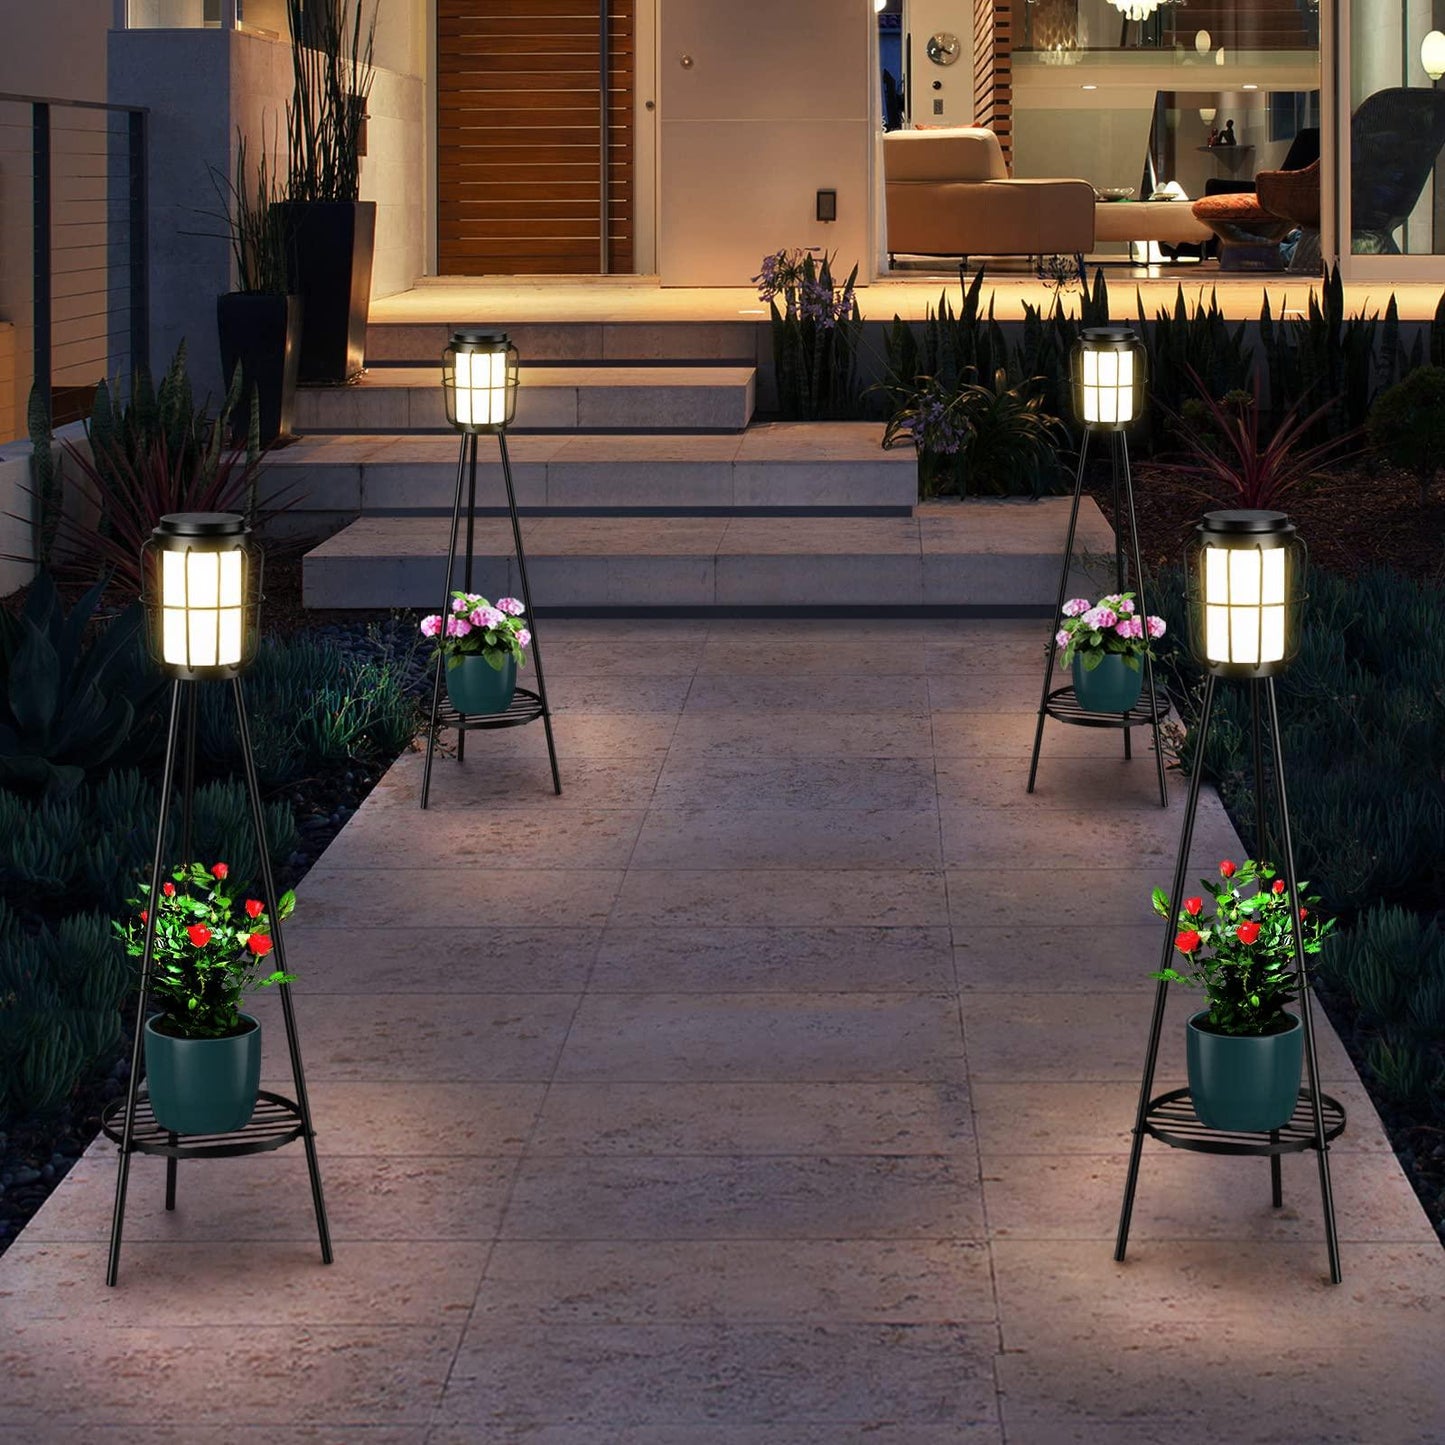 VISFLAIR Metal Solar Floor Lamps Outdoor with Plant Stand, 2 Pack Waterproof Solar Lantern Lights for Patio Deck Yard Garden Porch Decor (Black) - CookCave